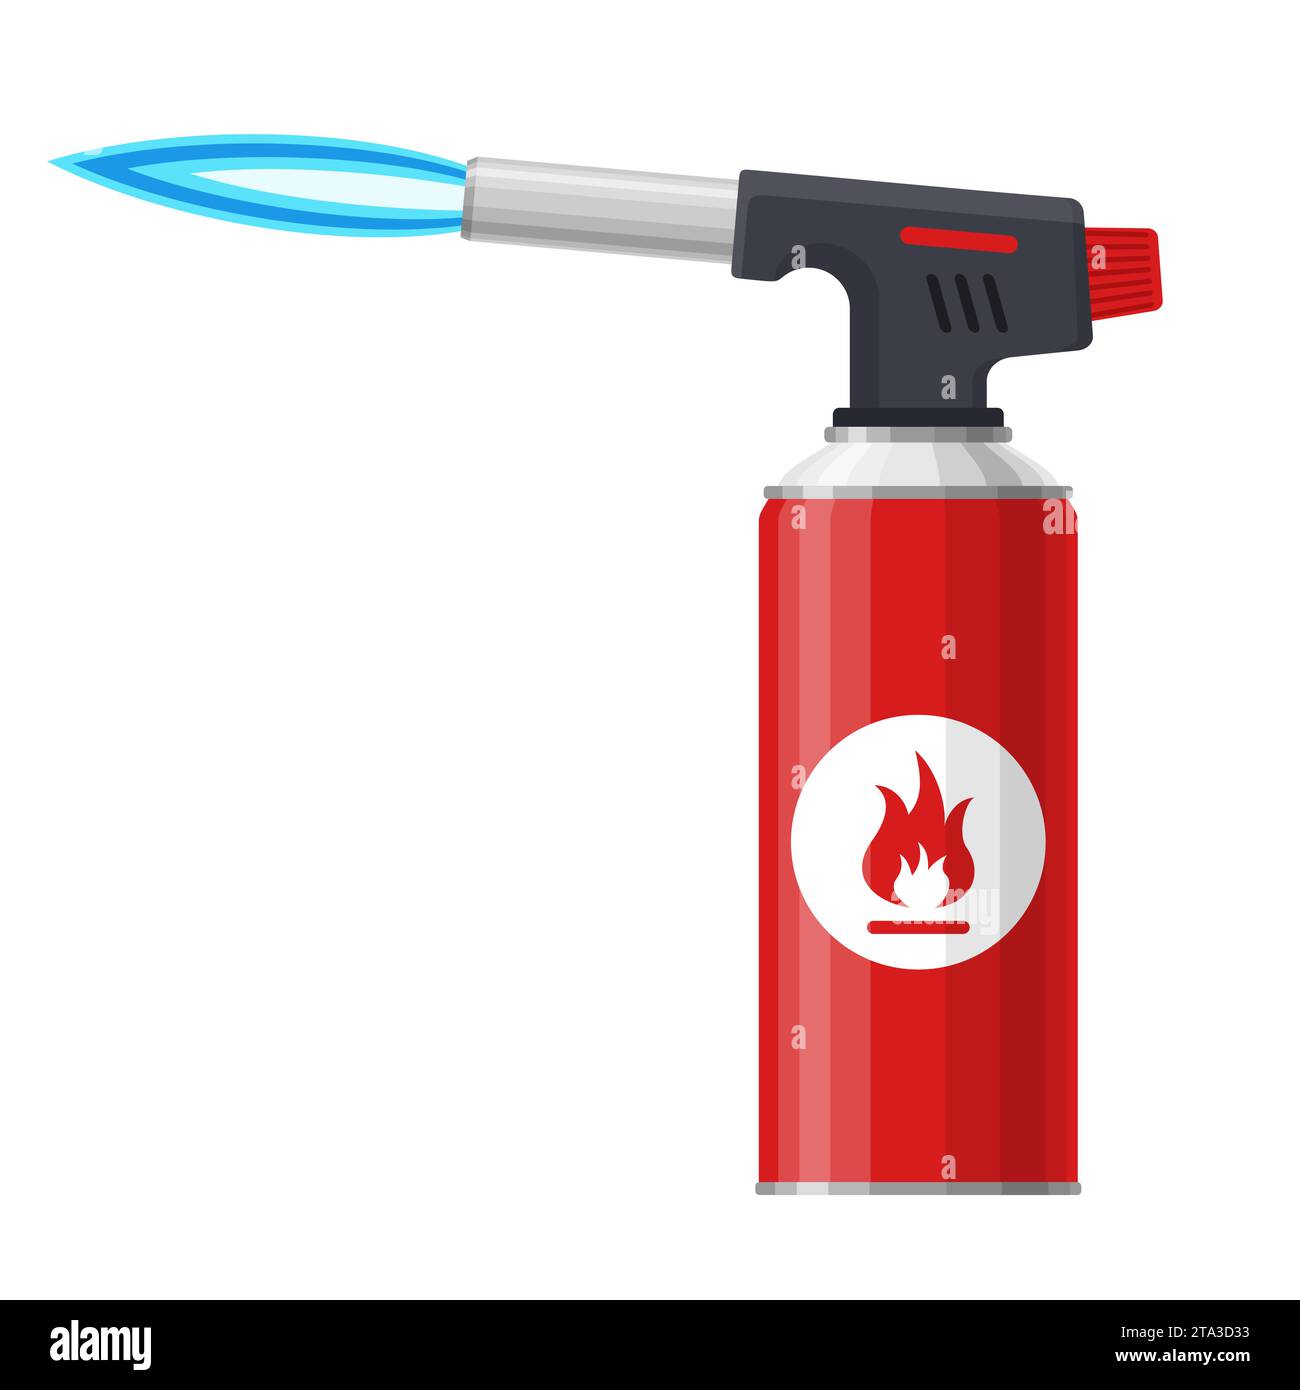 Blowtorch with blue flame isolated on white background. Manual gas torch burner, Welding flame tool icon. Vector illustration. Stock Vector